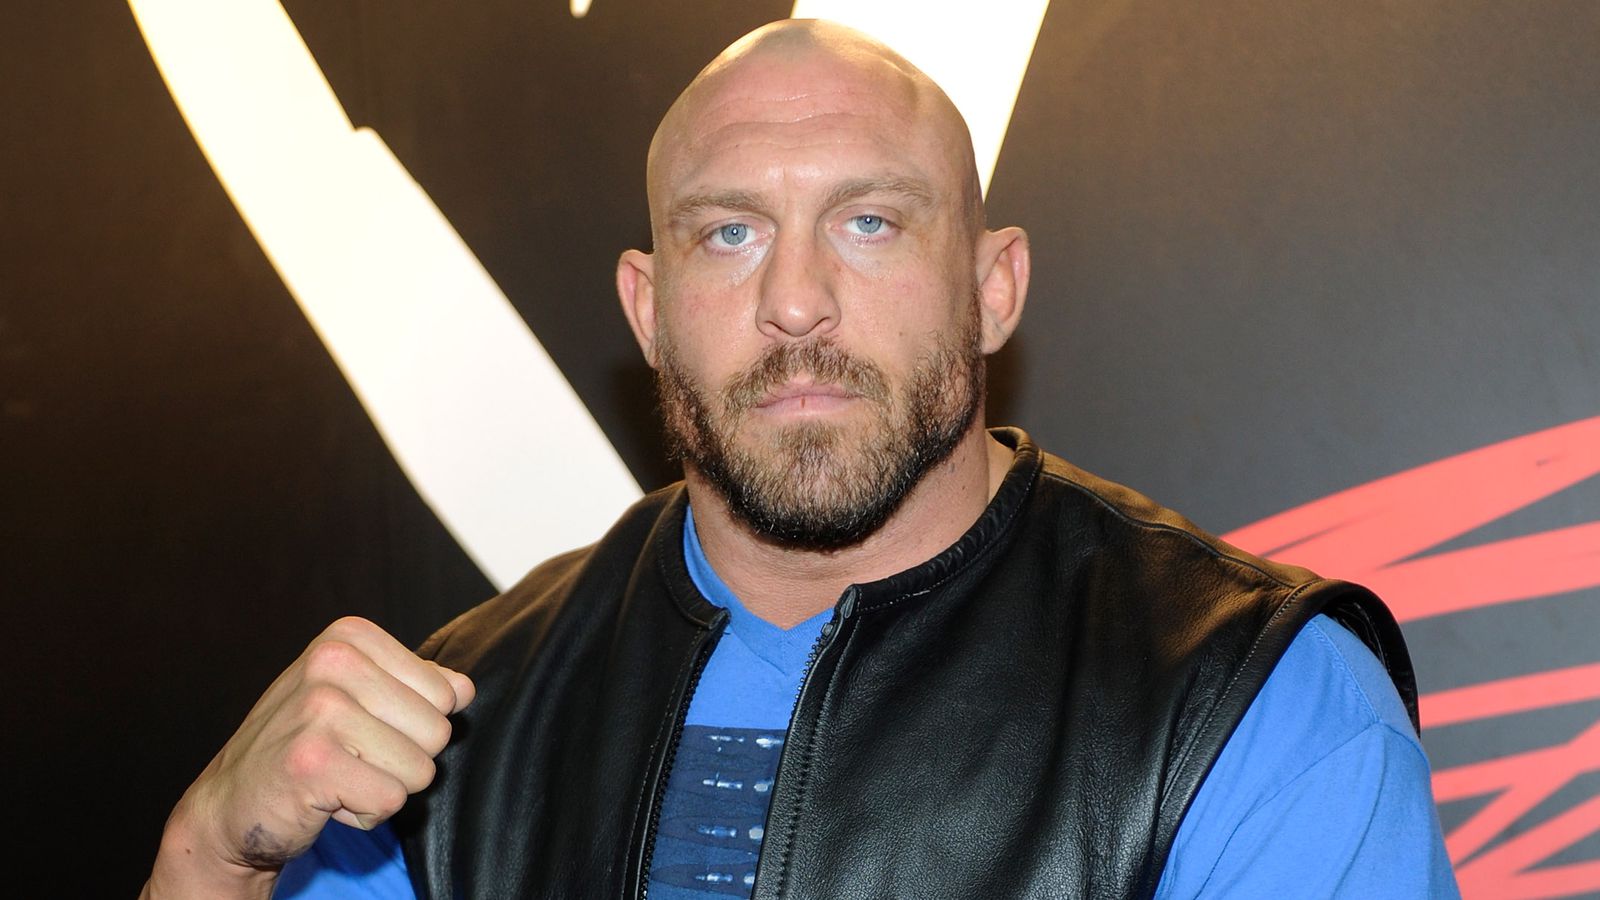 Ryback announces hes officially done with WWE on Aug. 8 